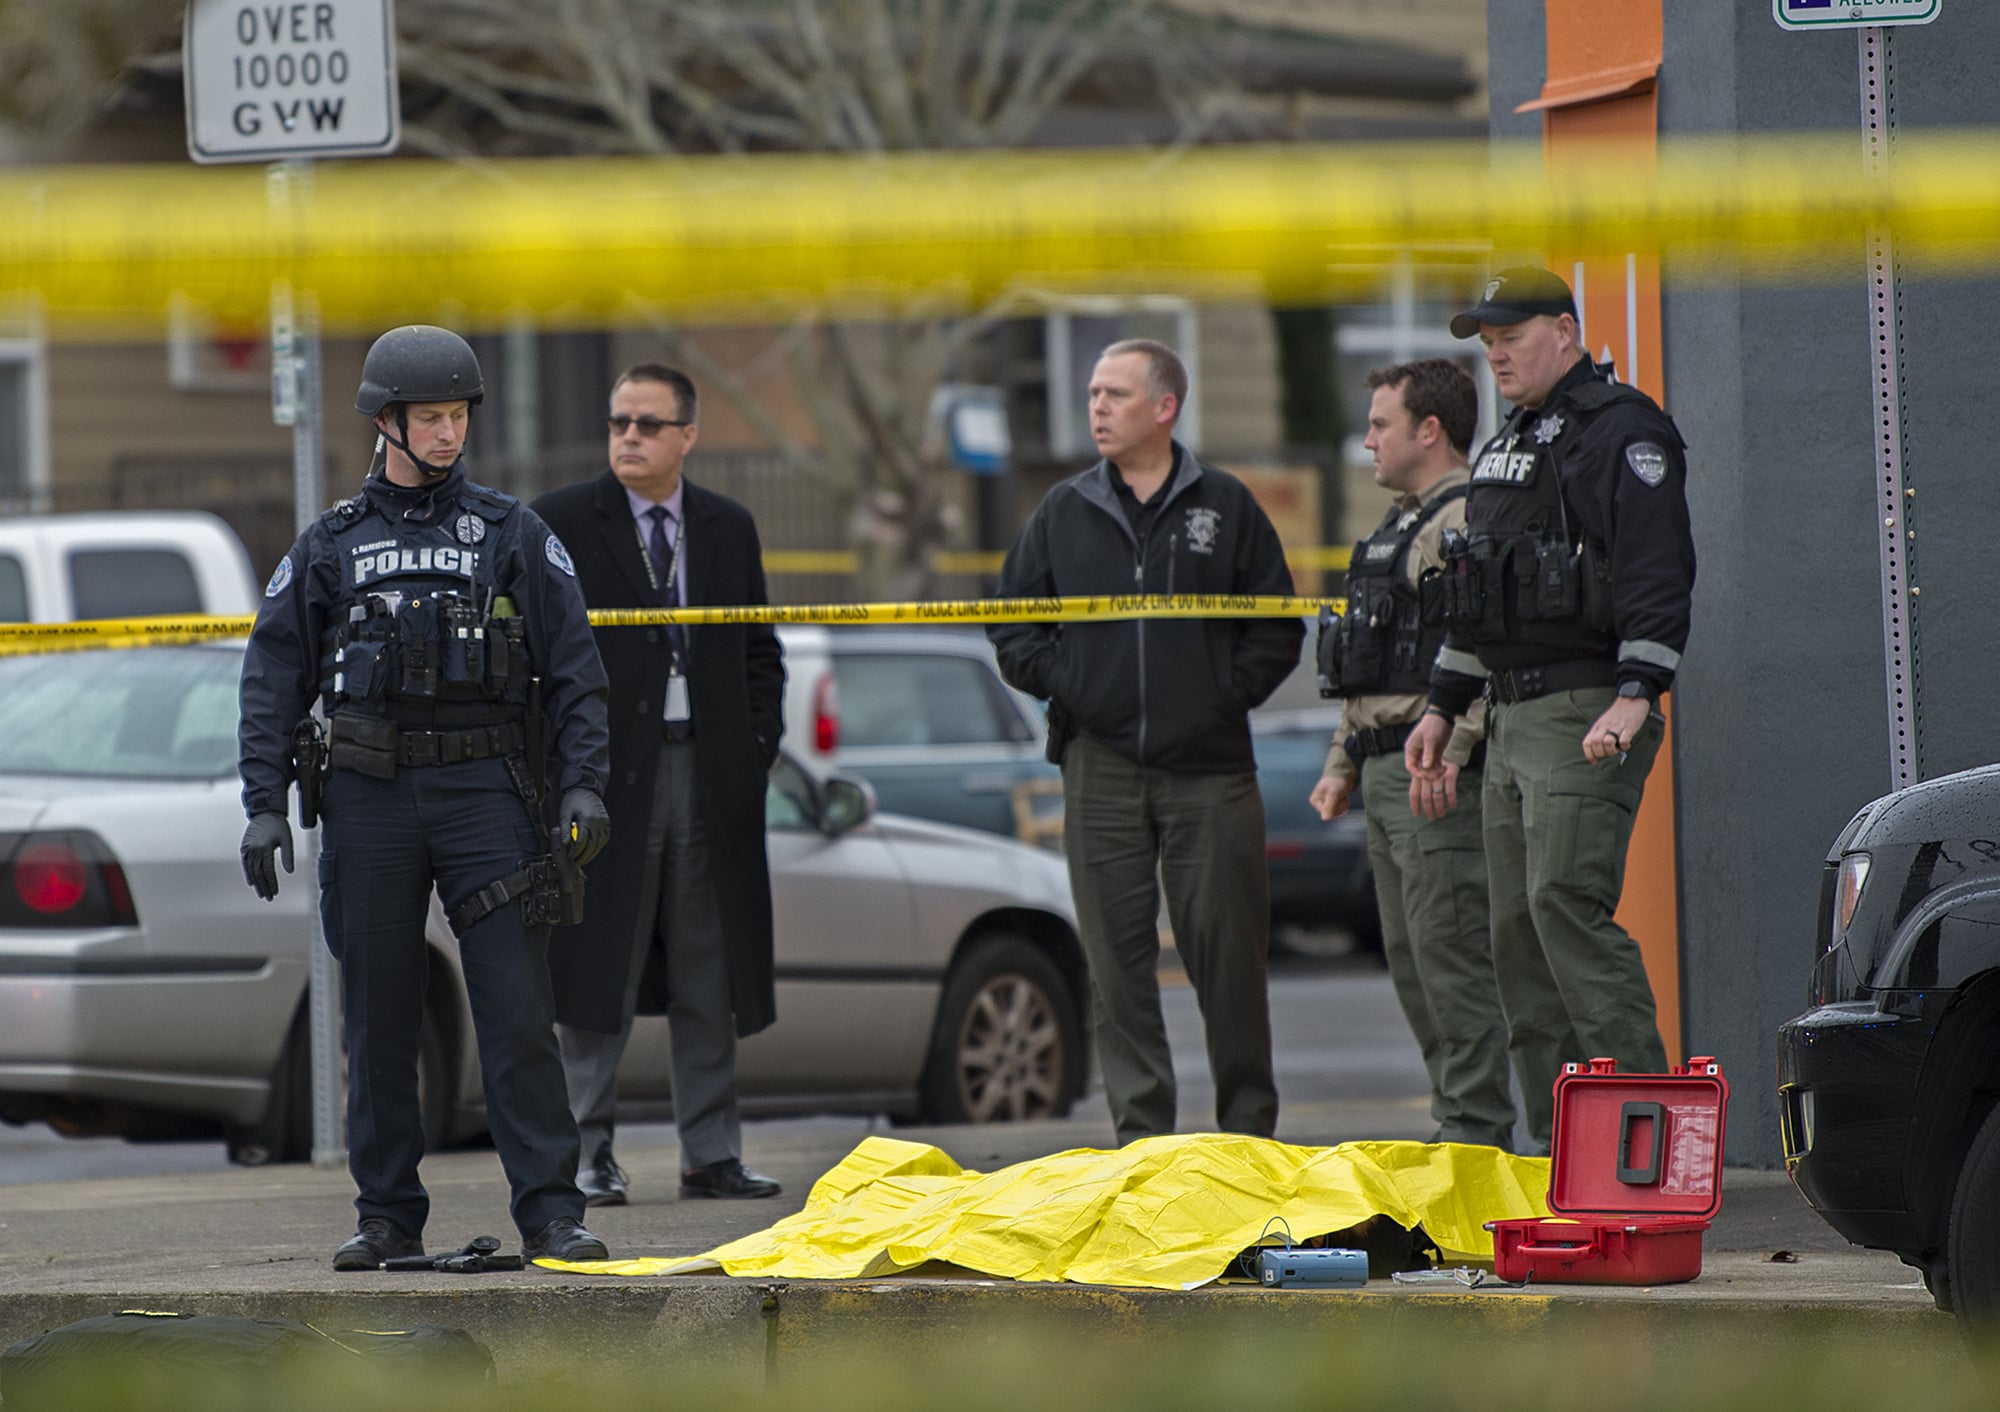 Gallery: Officer-involved shooting photo gallery